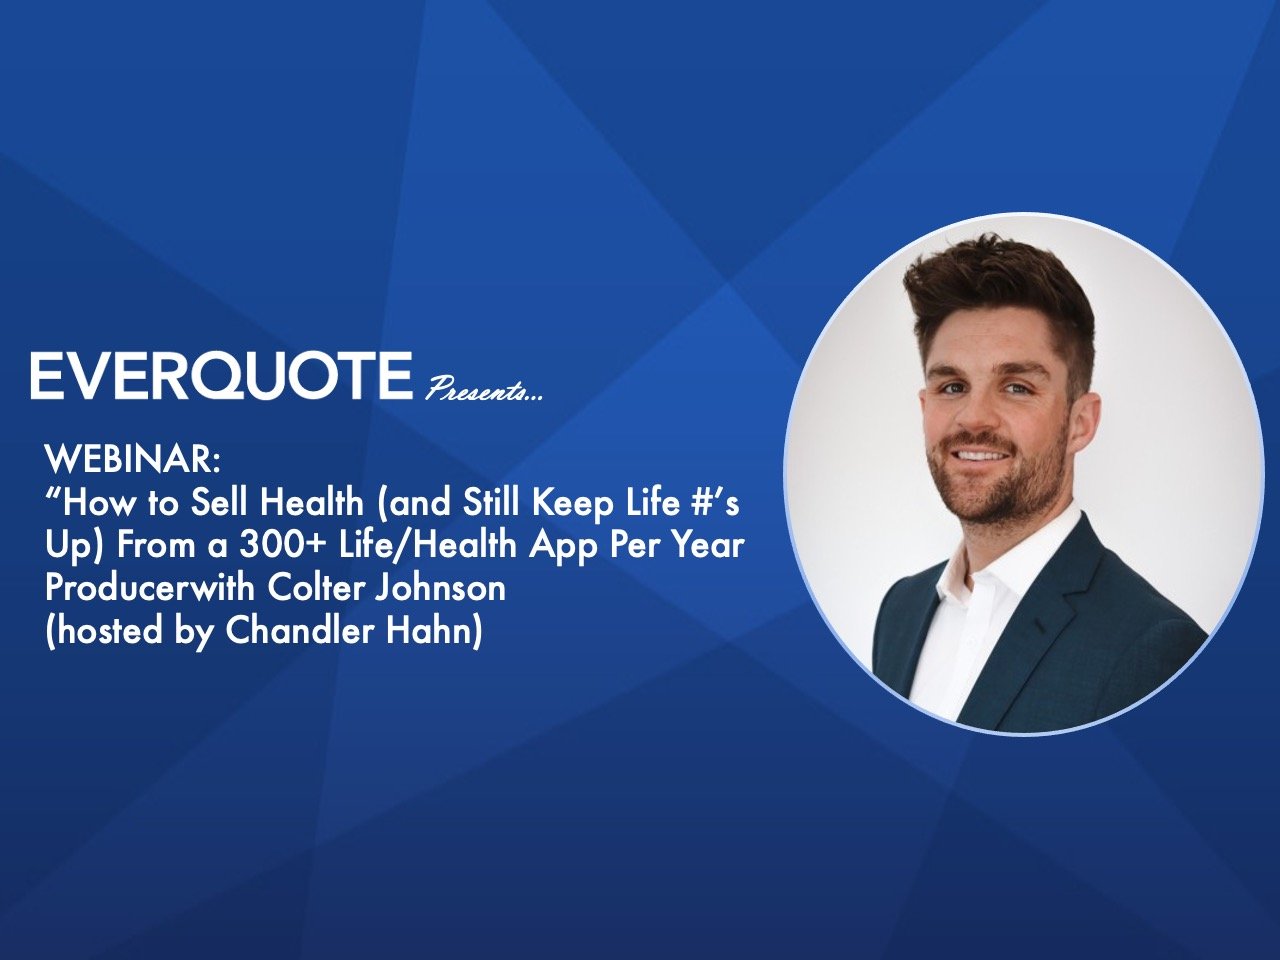 How to Sell Health (and Still Keep Life #’s Up) From a 300+ Life/Health App Per Year Producer with Colter Johnson